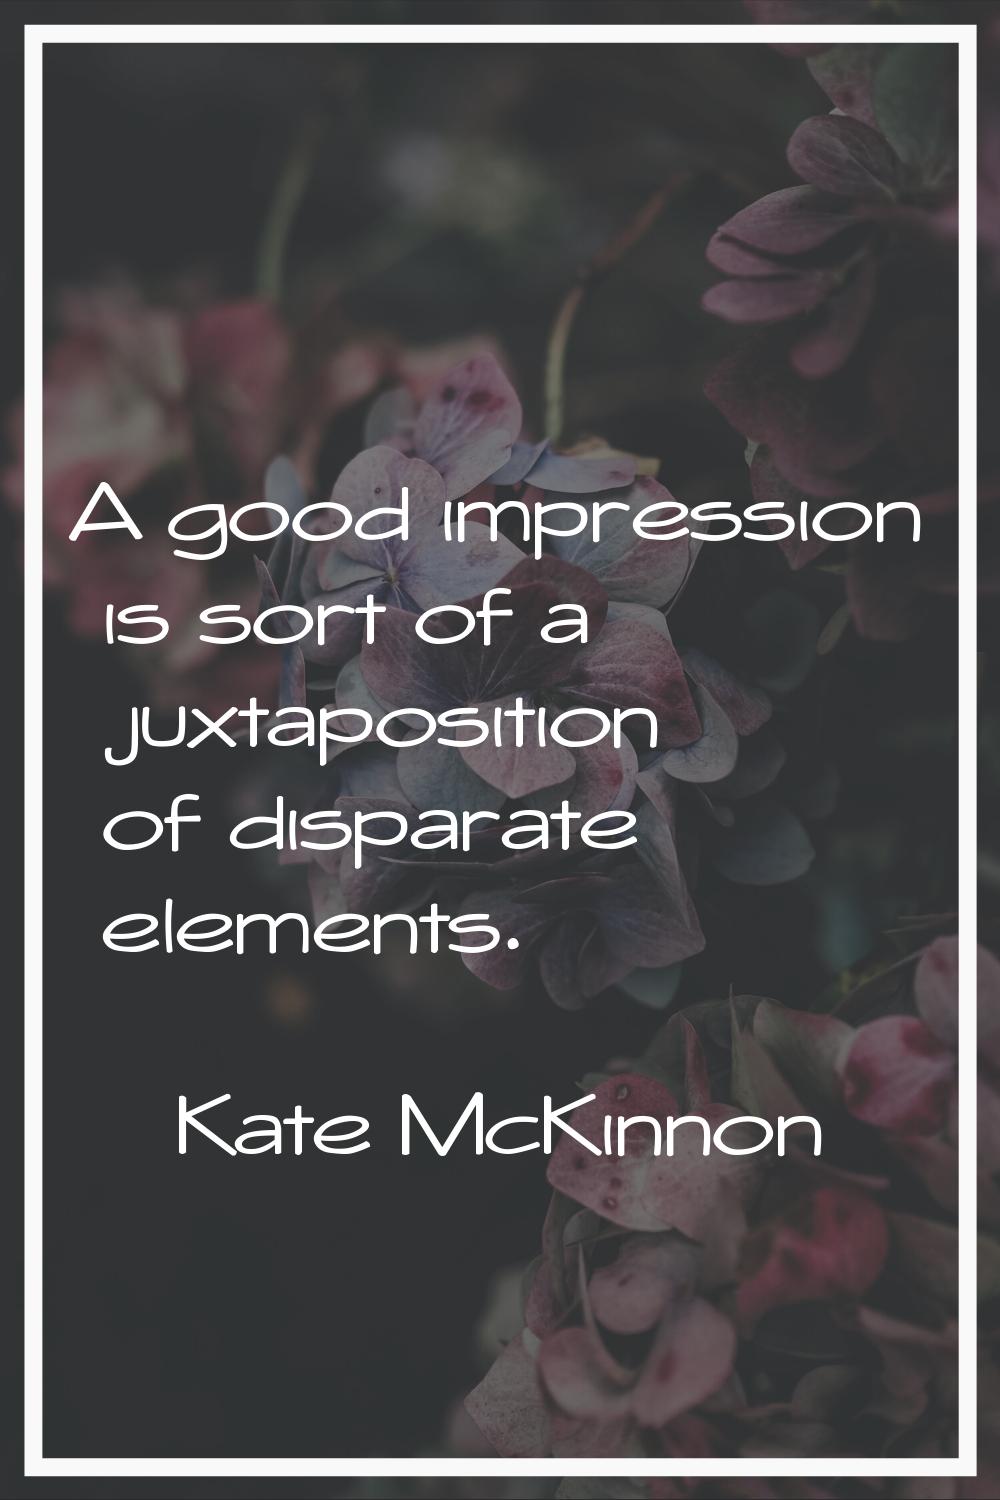 A good impression is sort of a juxtaposition of disparate elements.